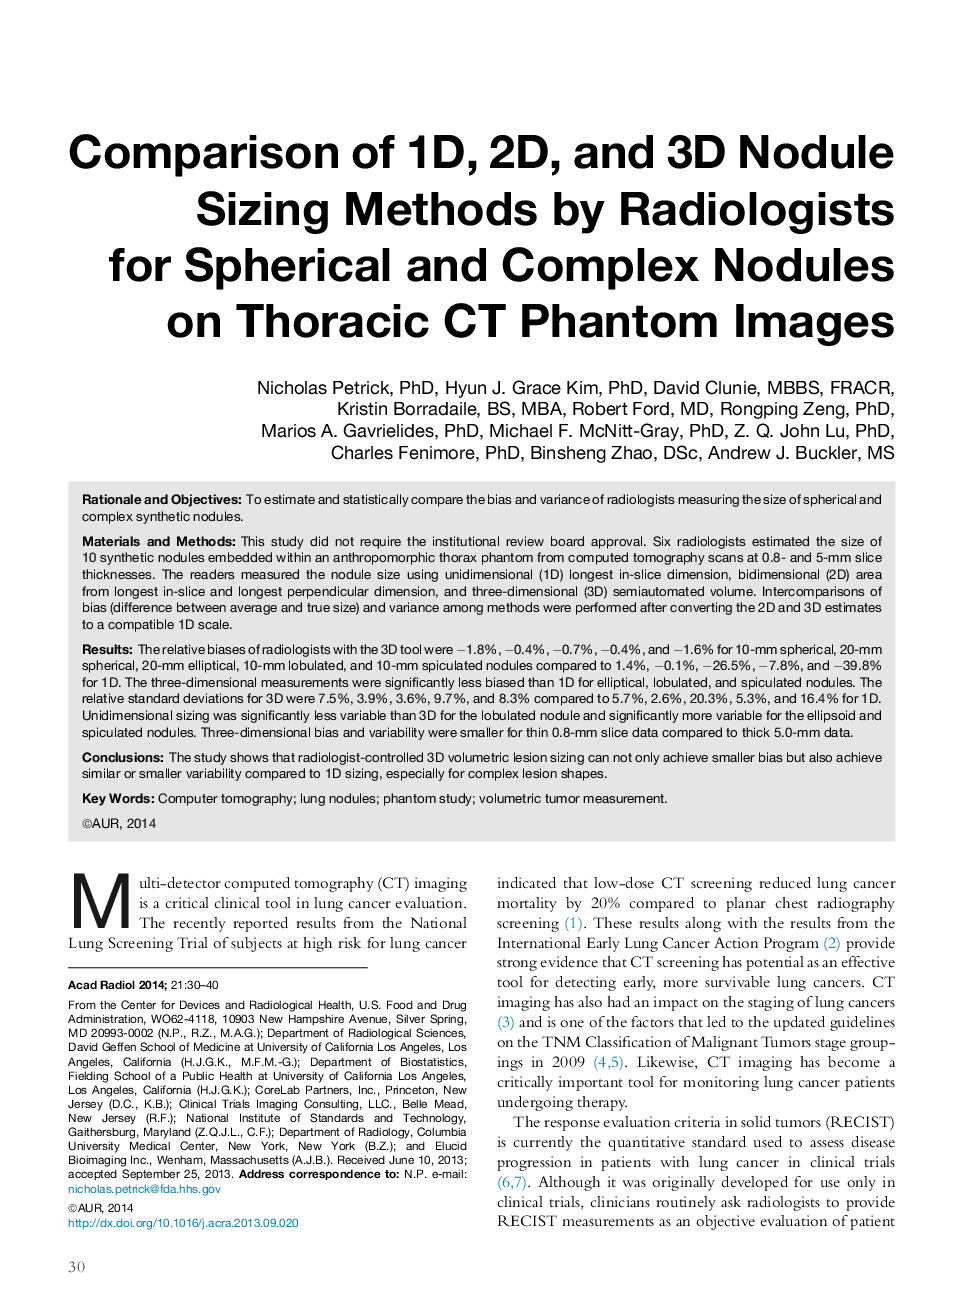 Comparison of 1D, 2D, and 3D Nodule Sizing Methods by Radiologists for Spherical and Complex Nodules on Thoracic CT Phantom Images